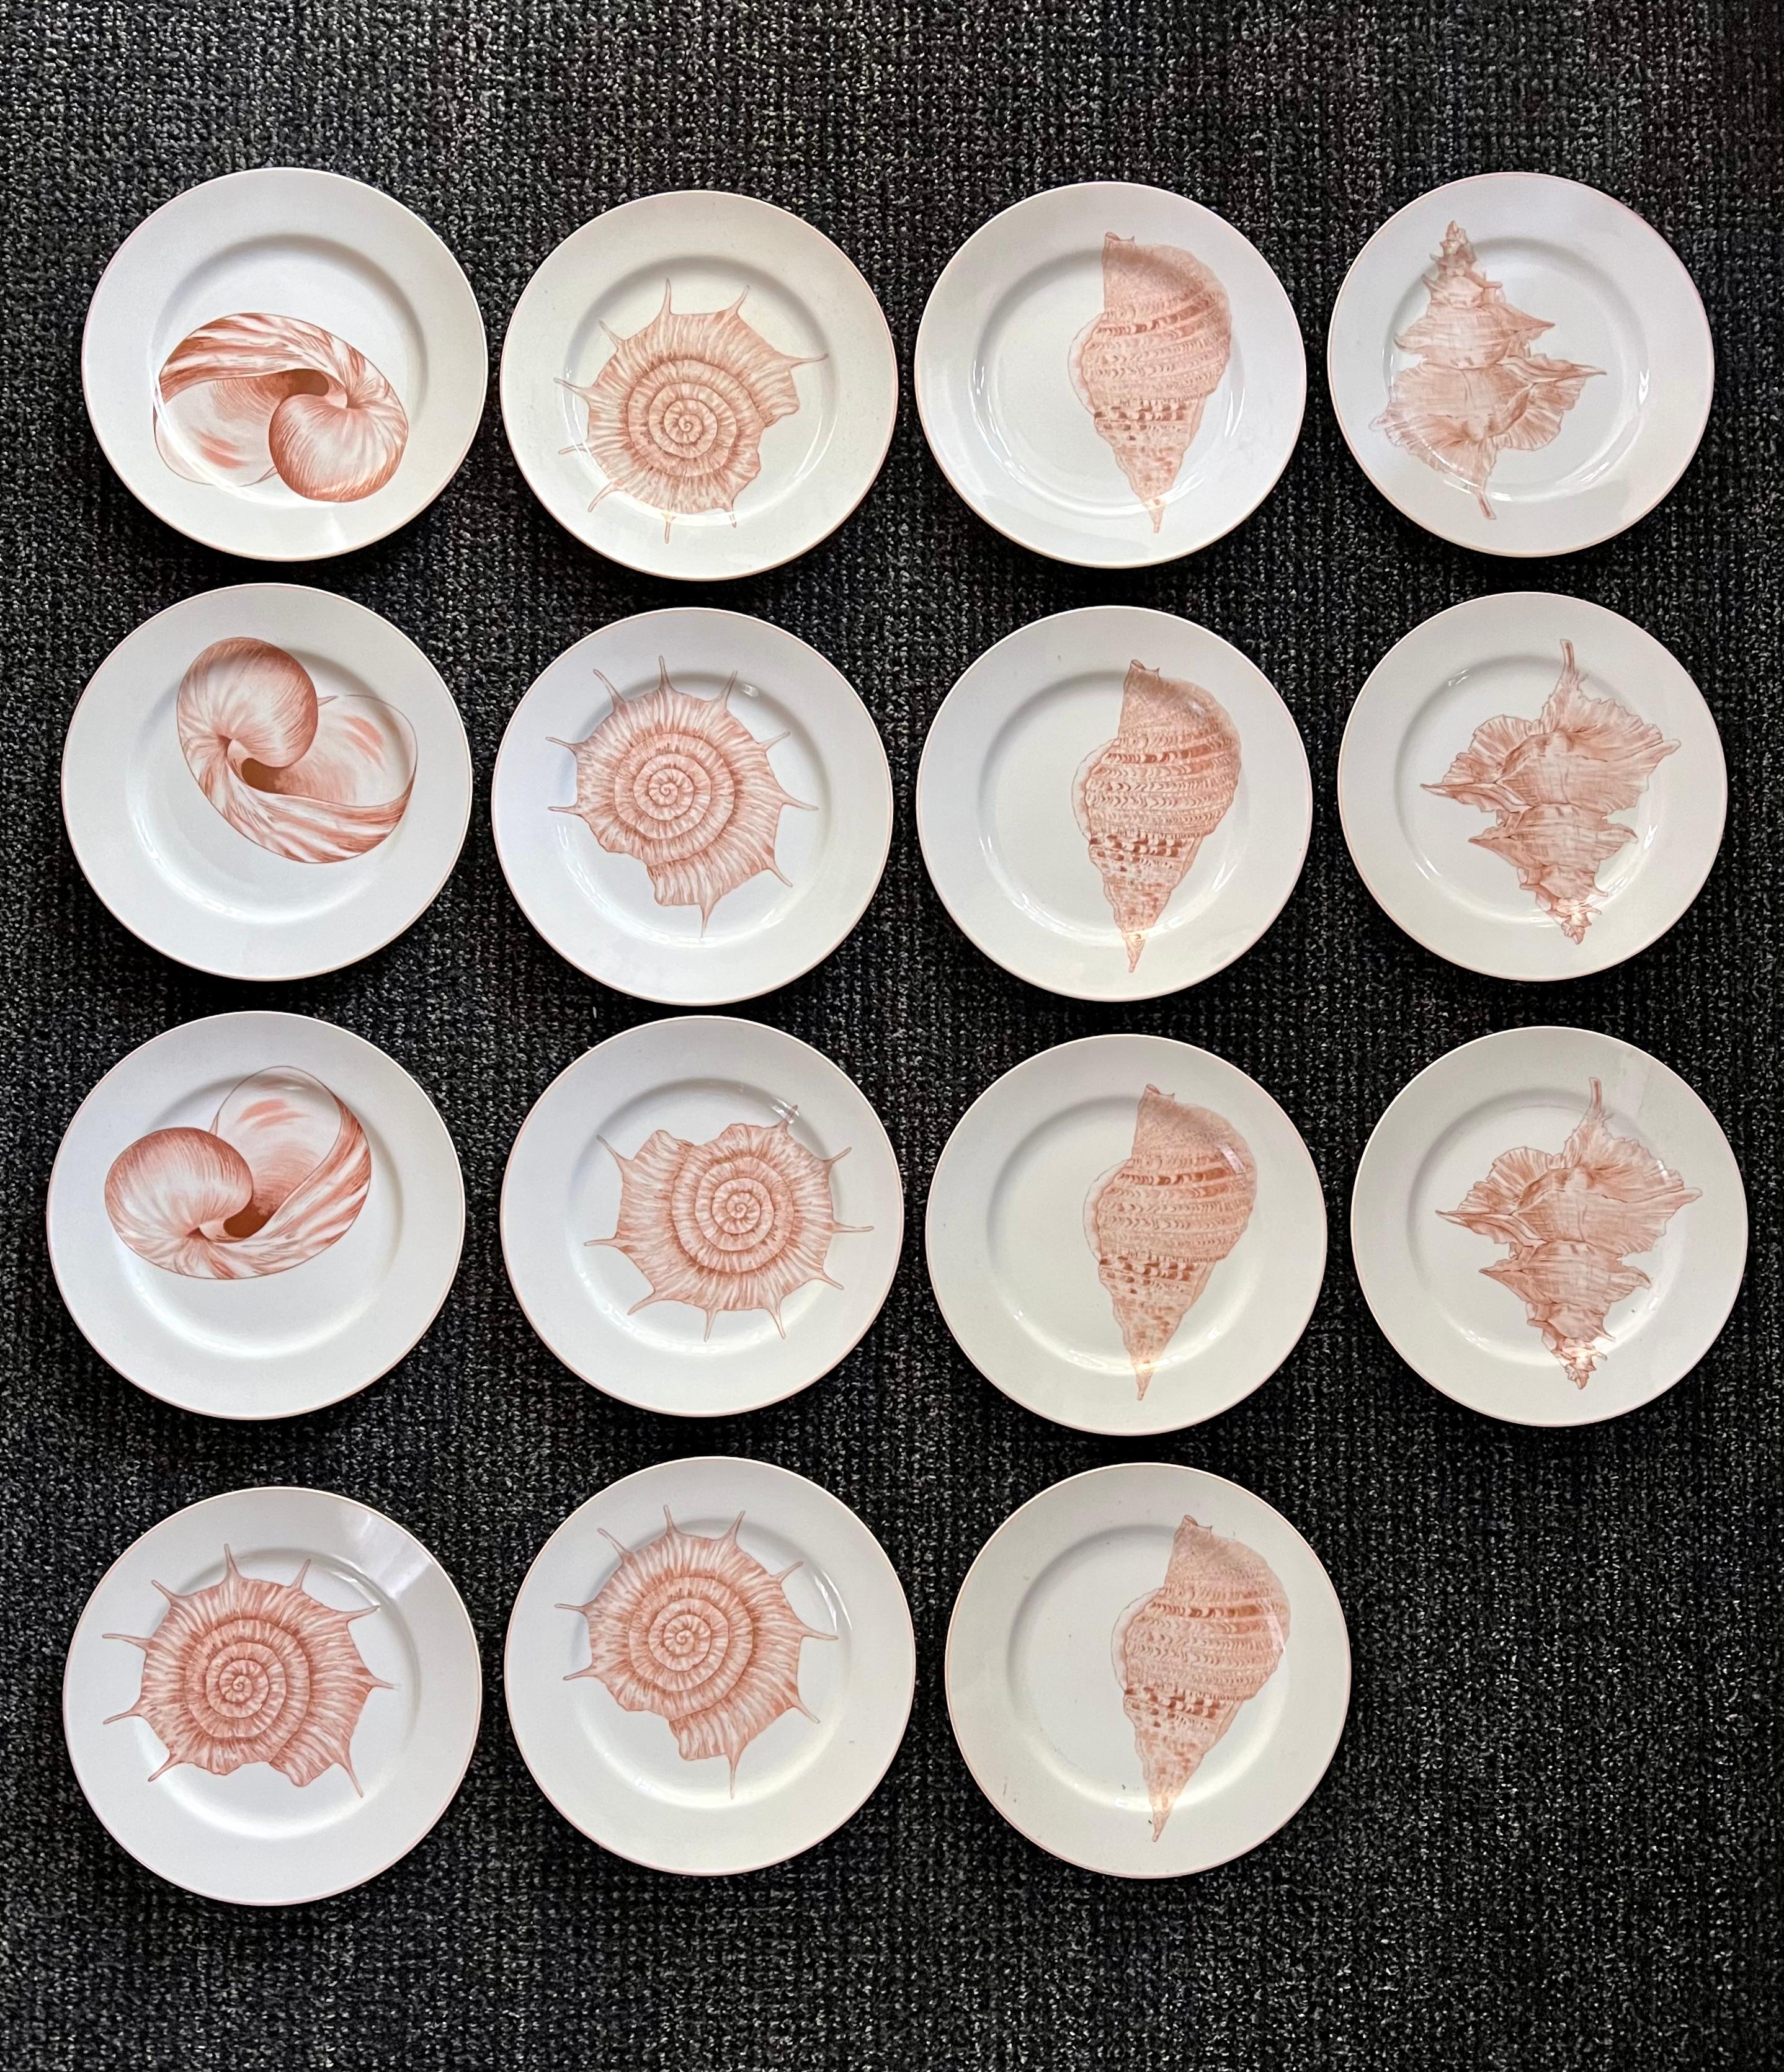 Fitz and Floyd shell themed dinner plates from the now retired Coquille collection. The set of 15 dinner plates features various 4 different shell designs. The plates have beautiful peach and coral hues, with a pink band on the edge. Wonderful to